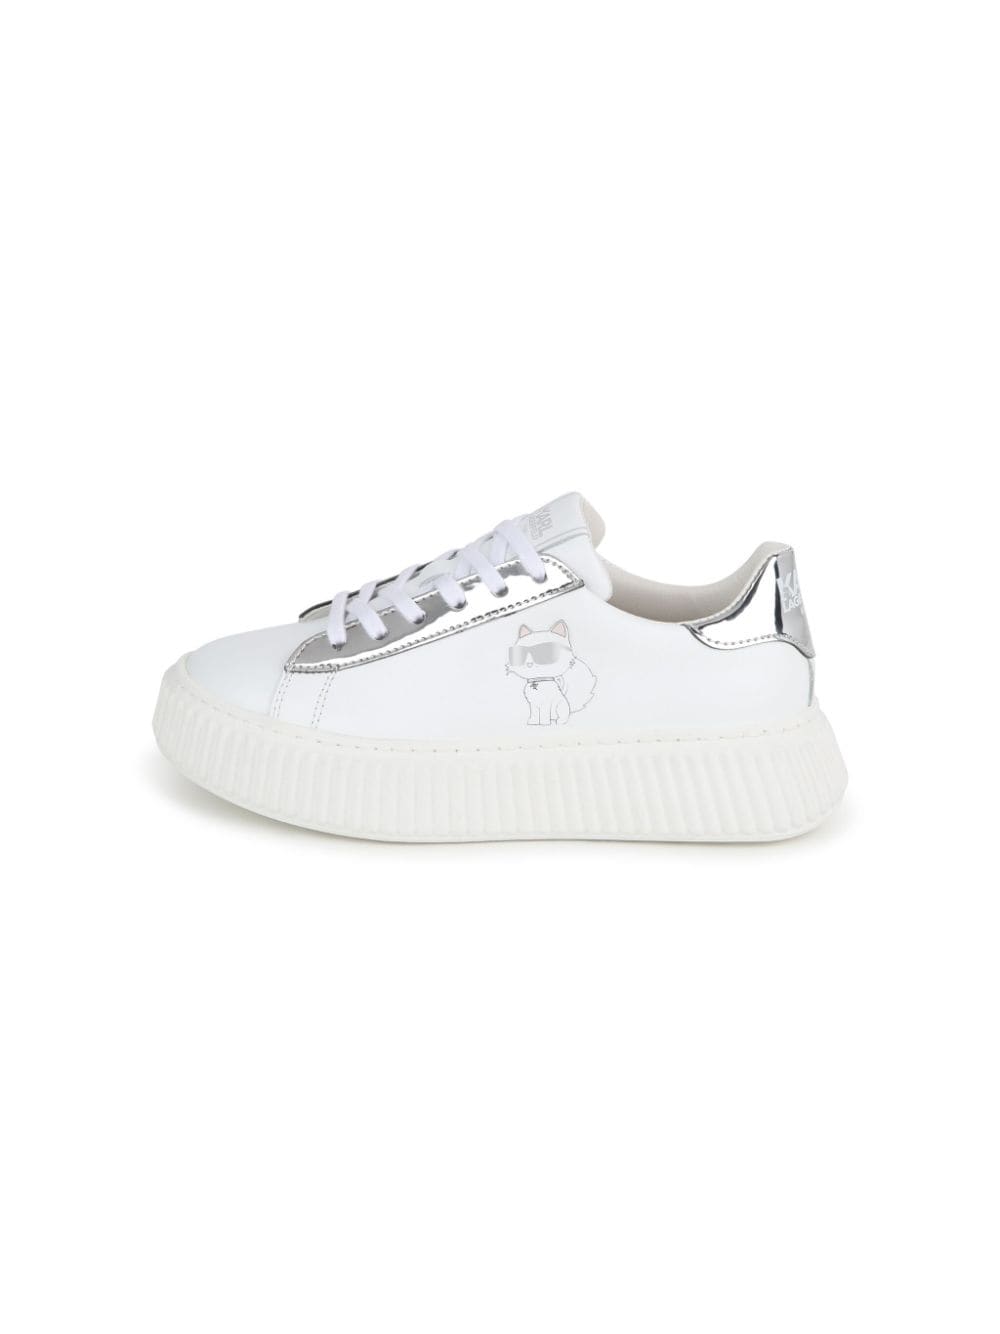 Karl Lagerfeld Kids Choupette leather low-top sneakers White